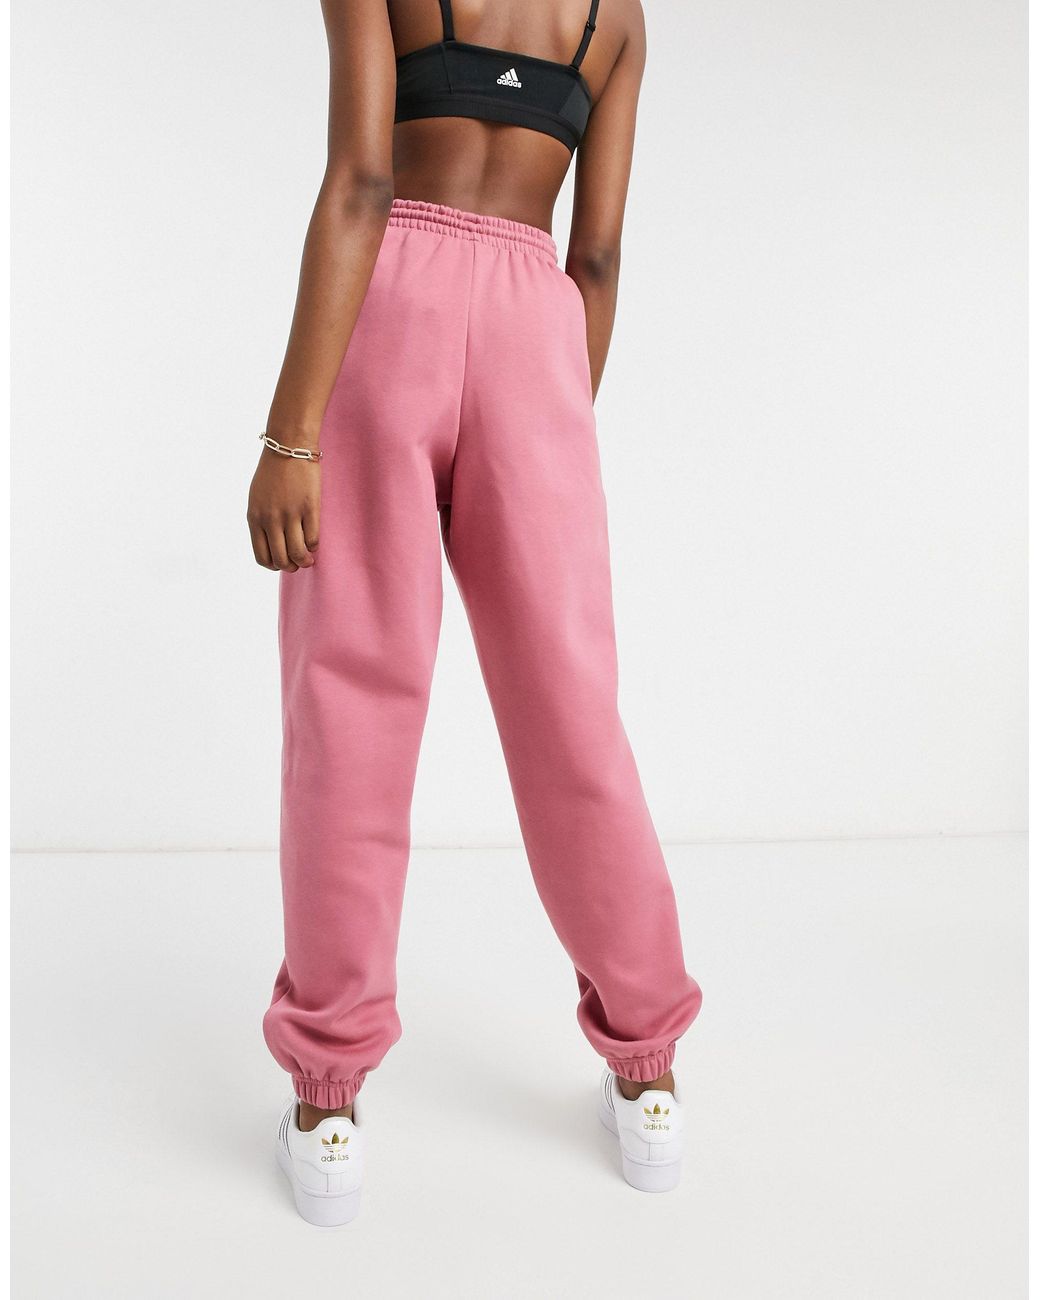 adidas Originals 'cosy Comfort' Oversized Cuffed joggers in Pink | Lyst